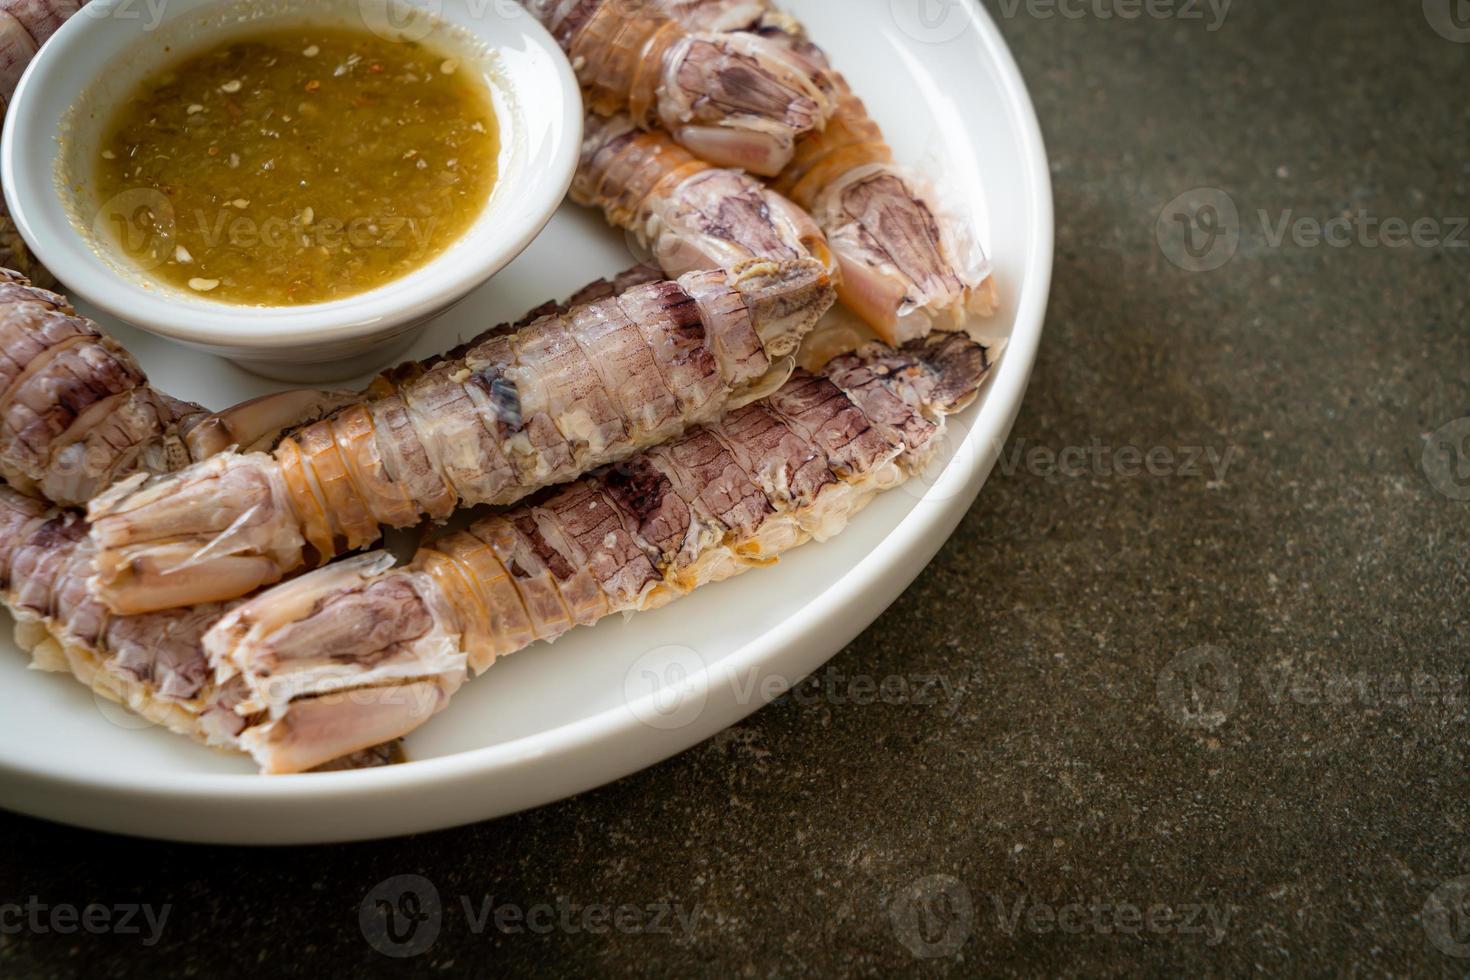 Steamed crayfish or mantis shrimps or stomatopods with spicy seafood sauce photo